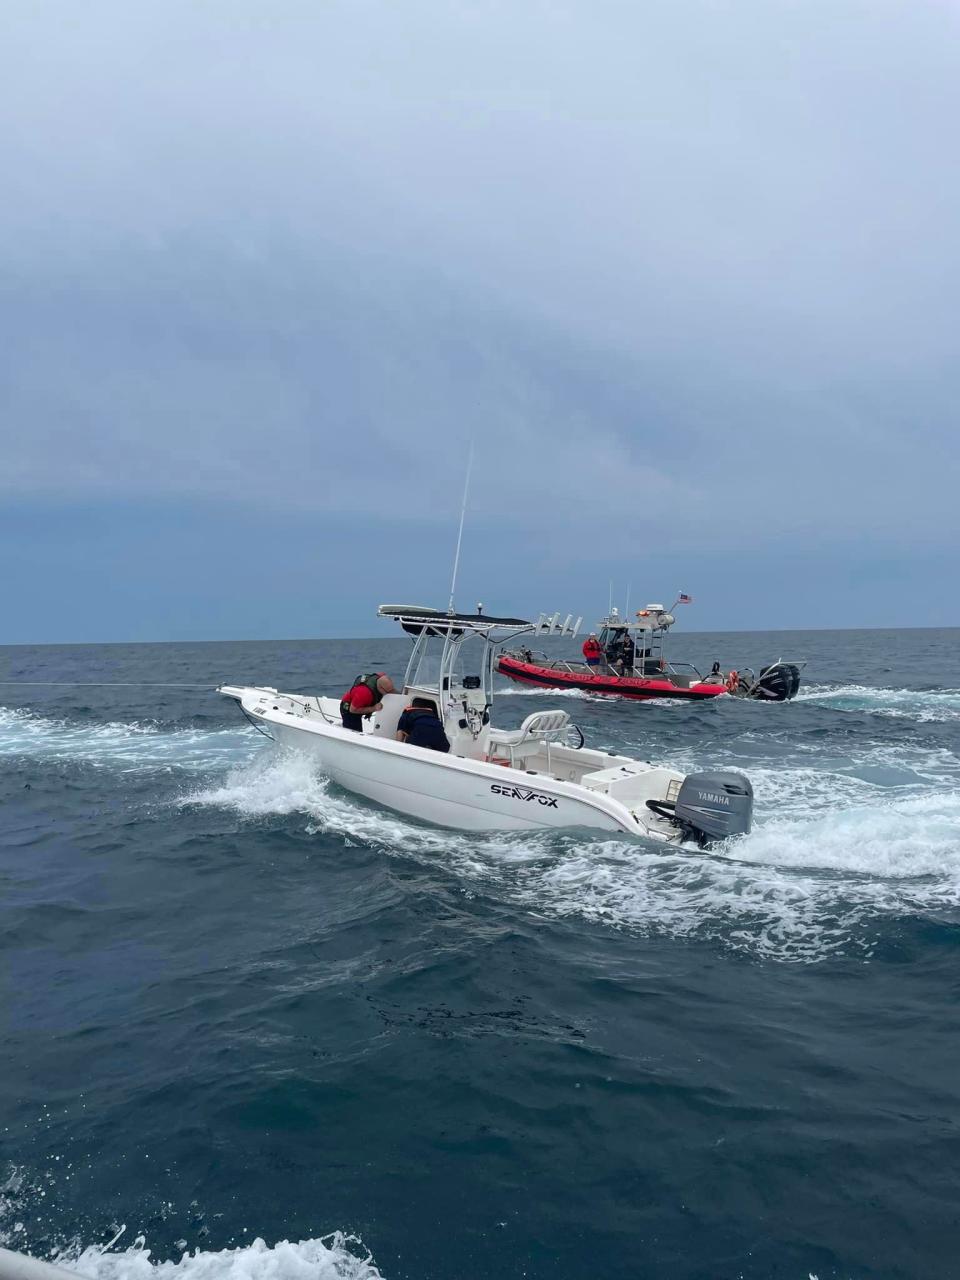 Multiple agencies assisted in rescuing a boat taking on water over 10 miles off the coast of St. Augustine.